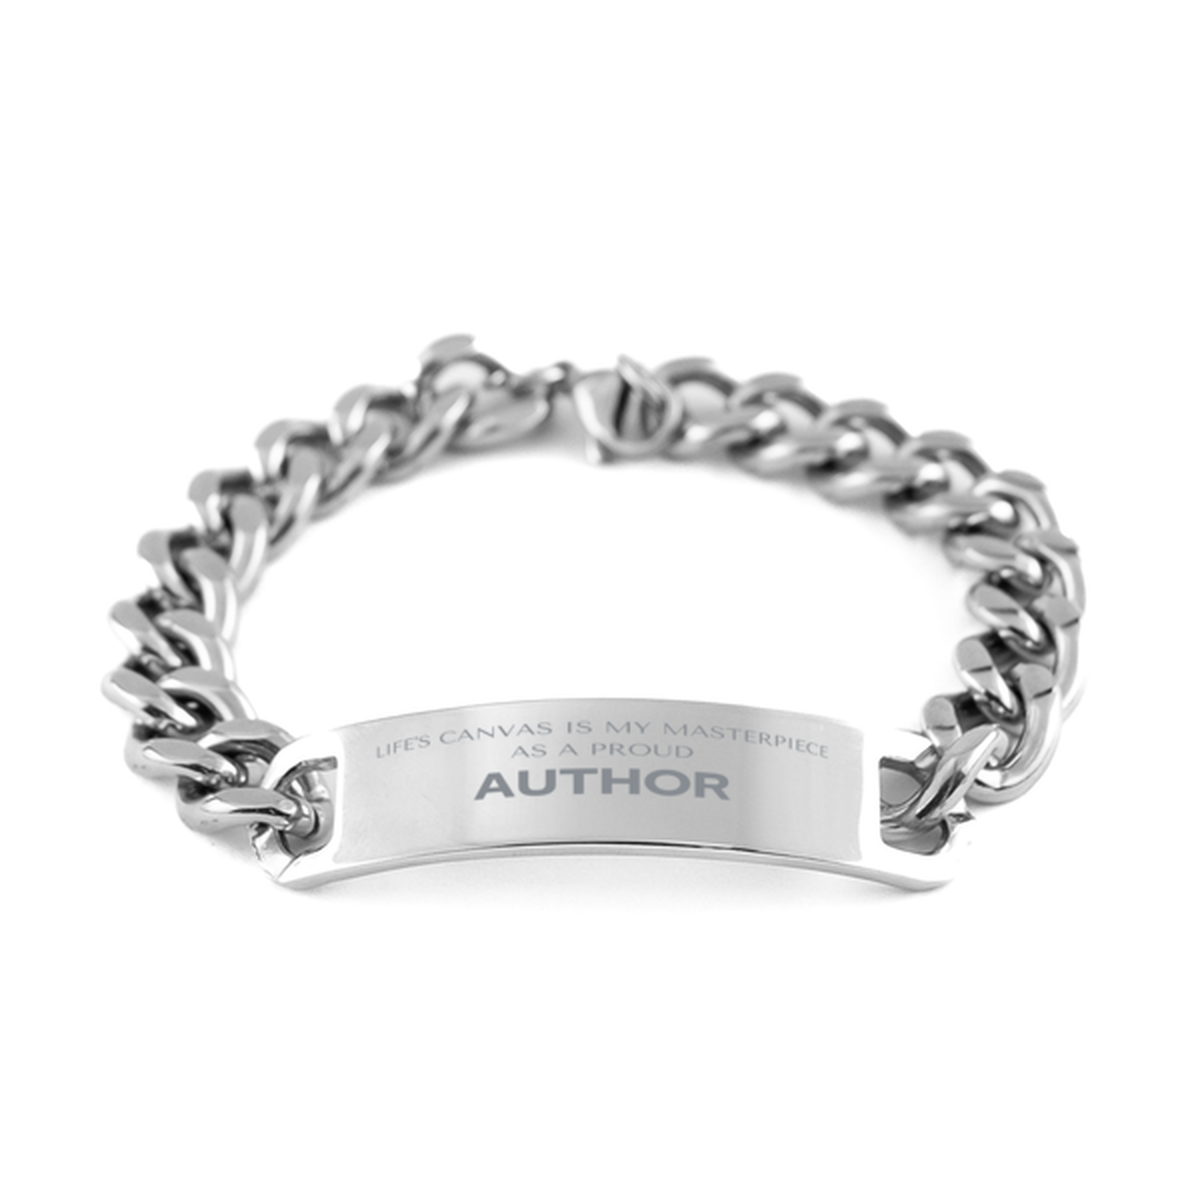 Proud Author Gifts, Life's canvas is my masterpiece, Epic Birthday Christmas Unique Cuban Chain Stainless Steel Bracelet For Author, Coworkers, Men, Women, Friends